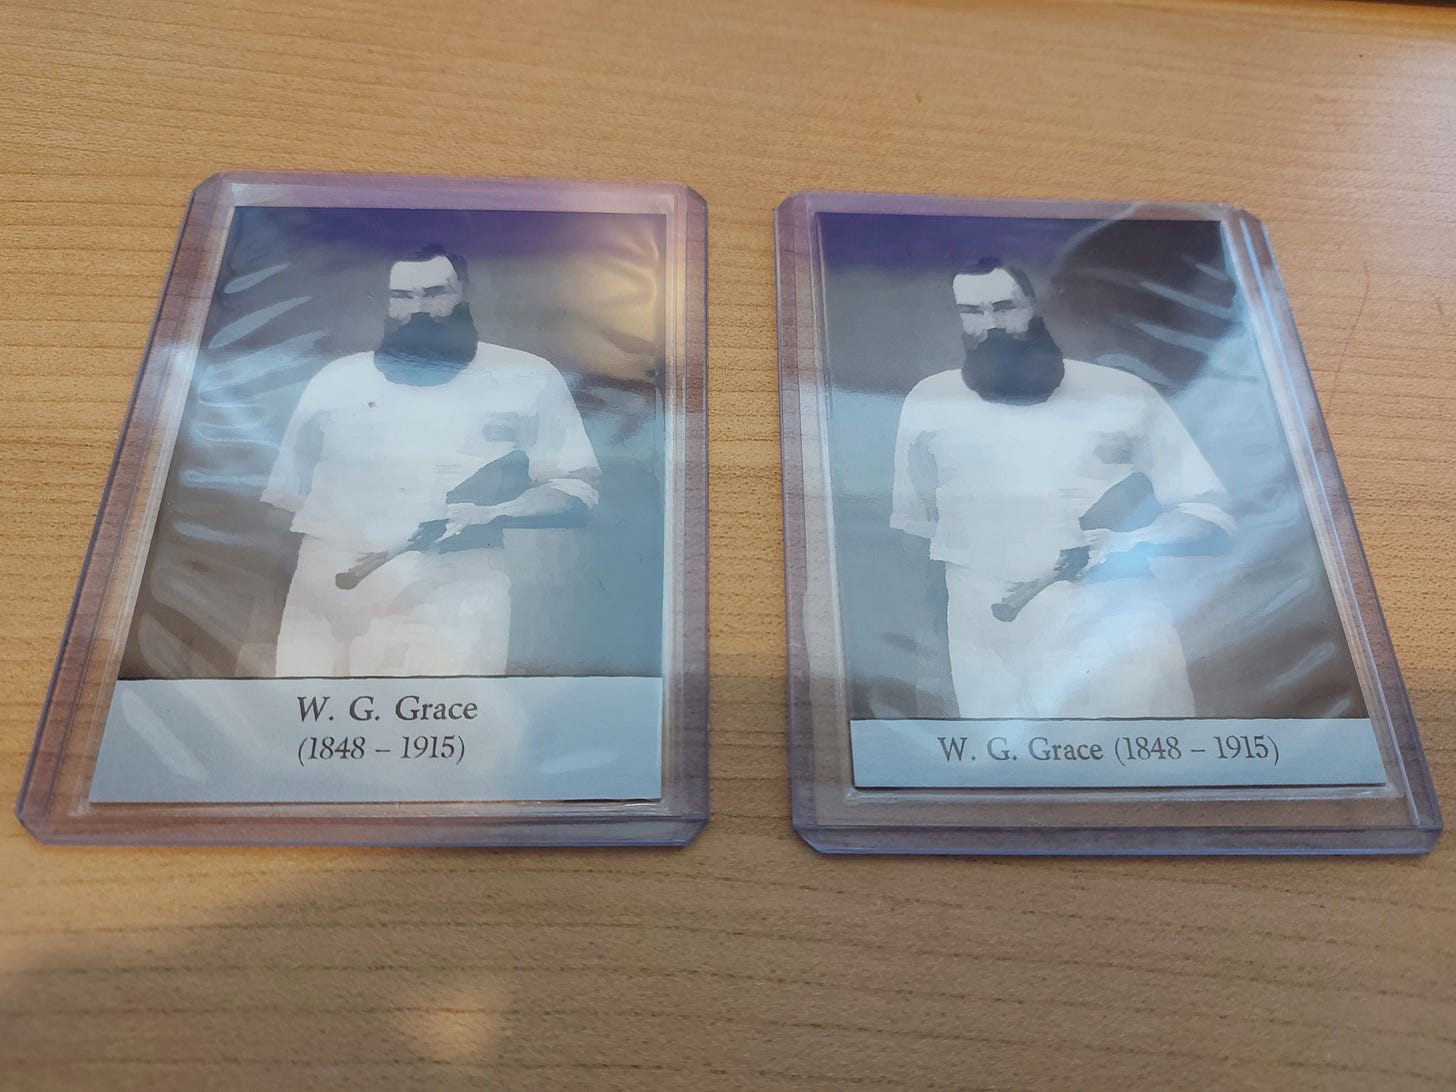 (Card fronts. Final version on the left; prototype on the right). W.G. Grace trading cards on desk; side to side.